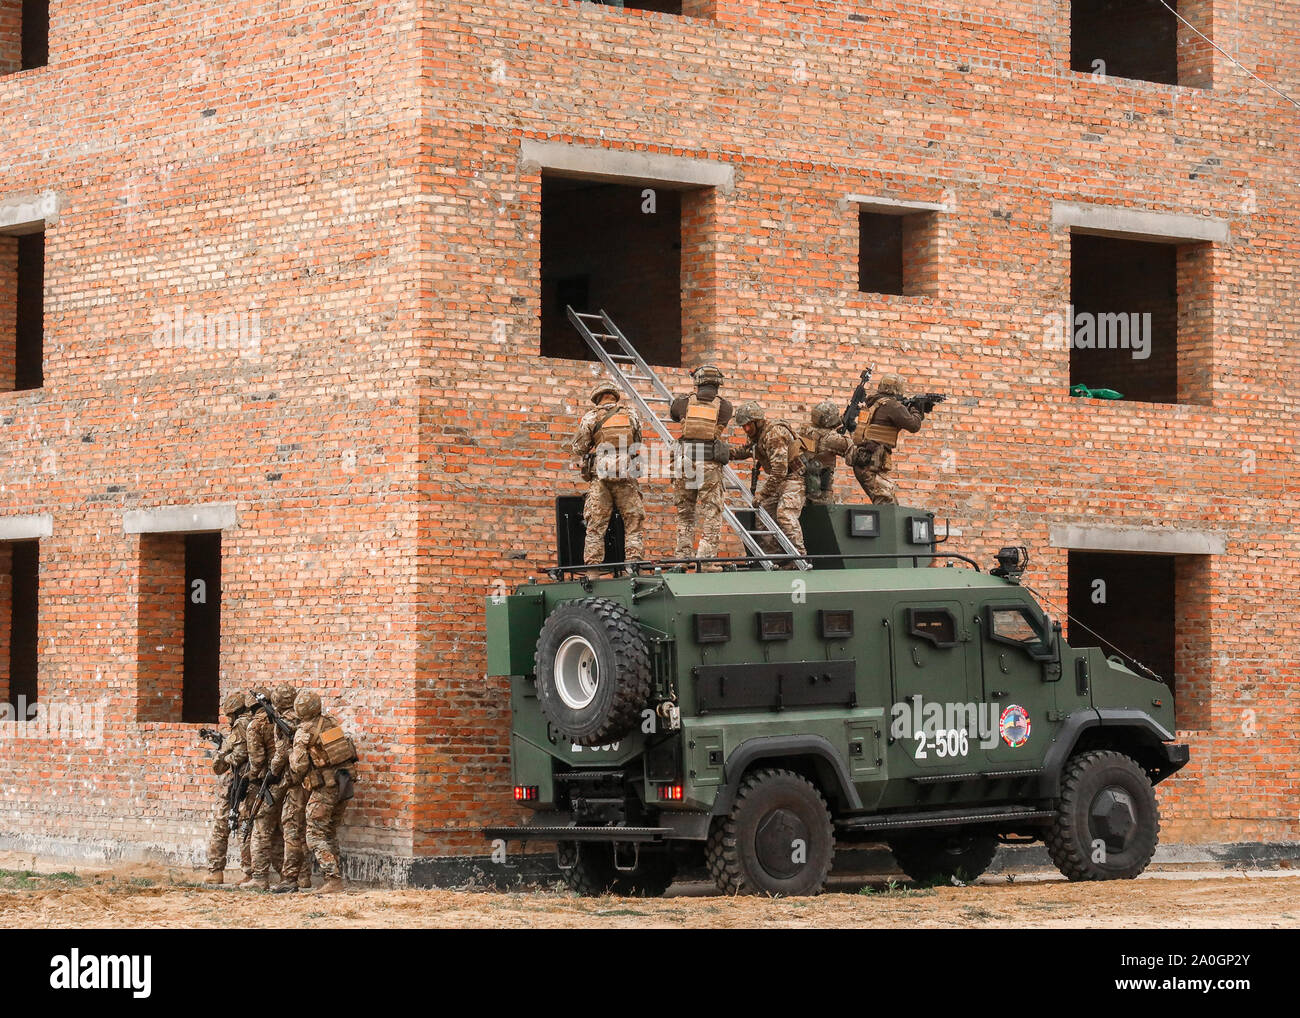 Personnel assigned to the Department of State Guard of Ukraine infiltrate a building during an antiterrorism raid rehearsal as part of Rapid Trident 2019 at Combat Training Center-Yavoriv, Sept. 18, 2019. Stock Photo